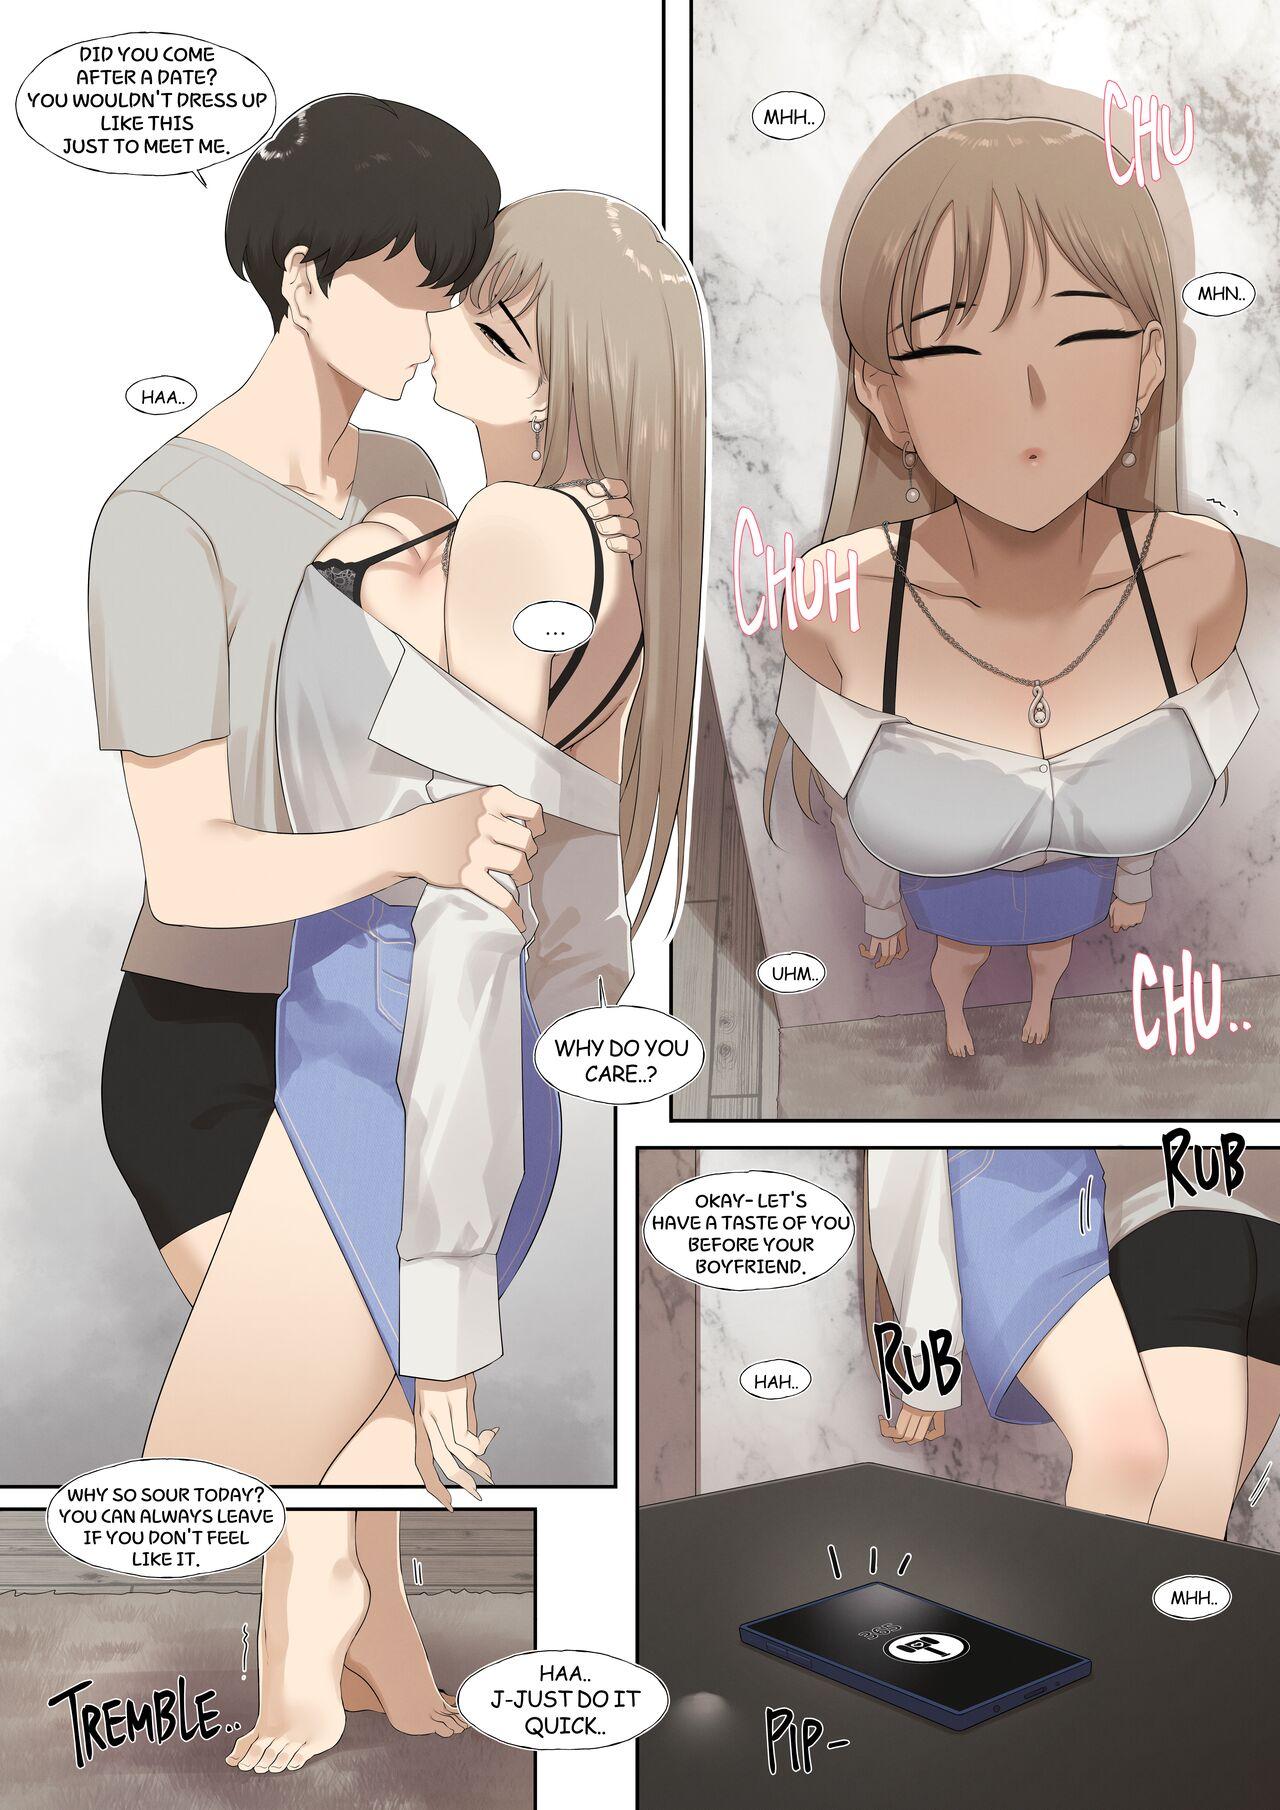 Gaygroupsex Common sense alteration - A world one can be forgiven with mating - Original Cosplay - Page 4